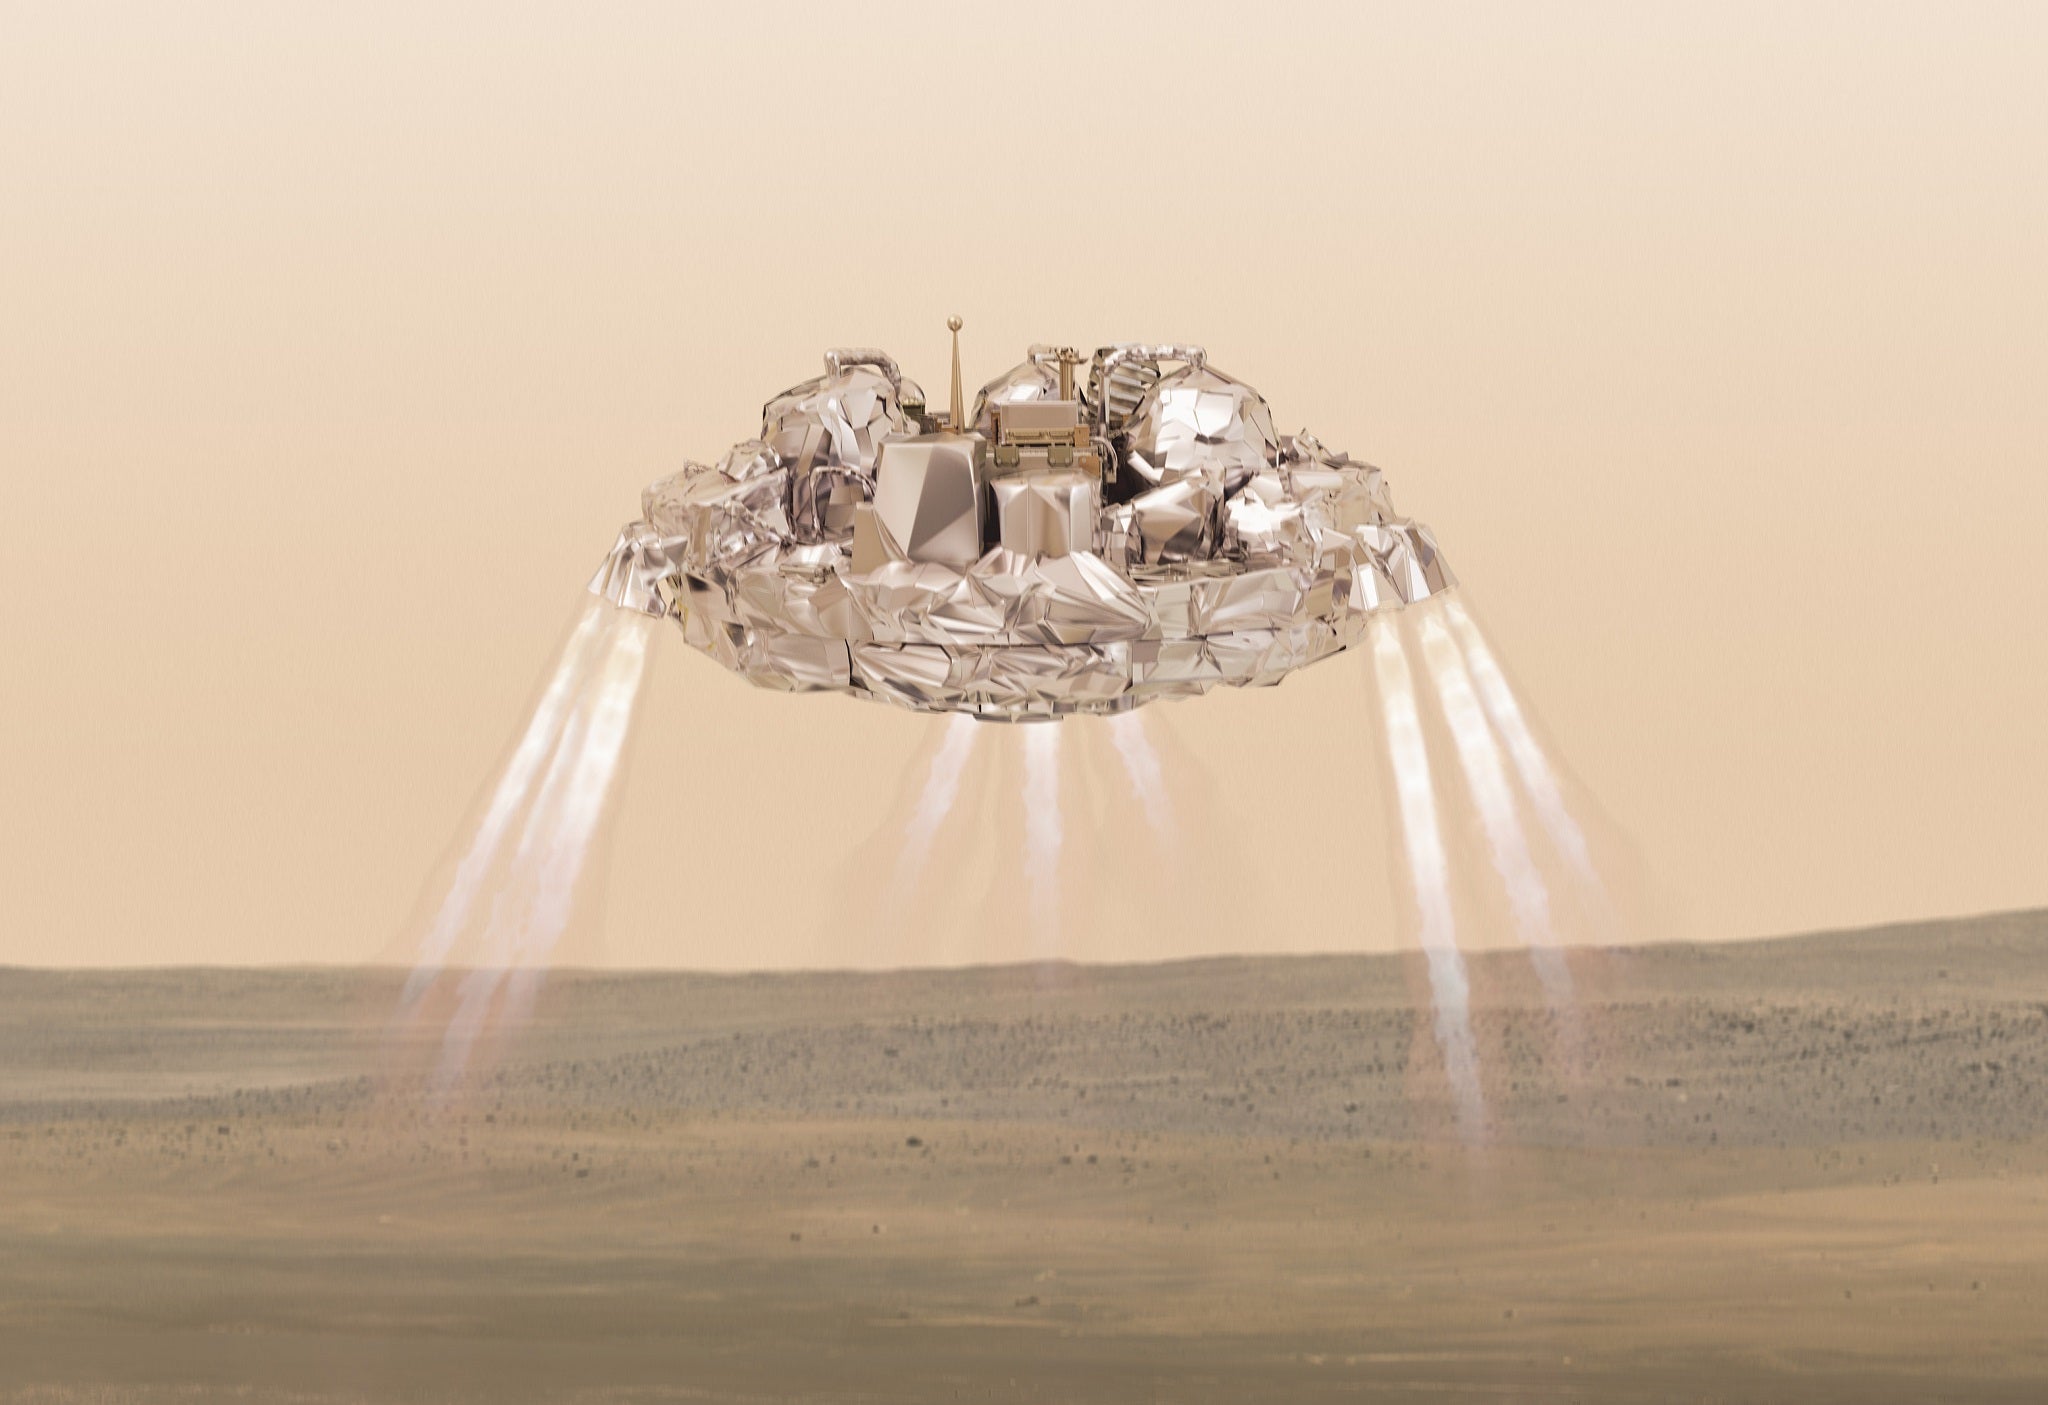 An artist's impression of Schiaperelli approaching the surface of Mars